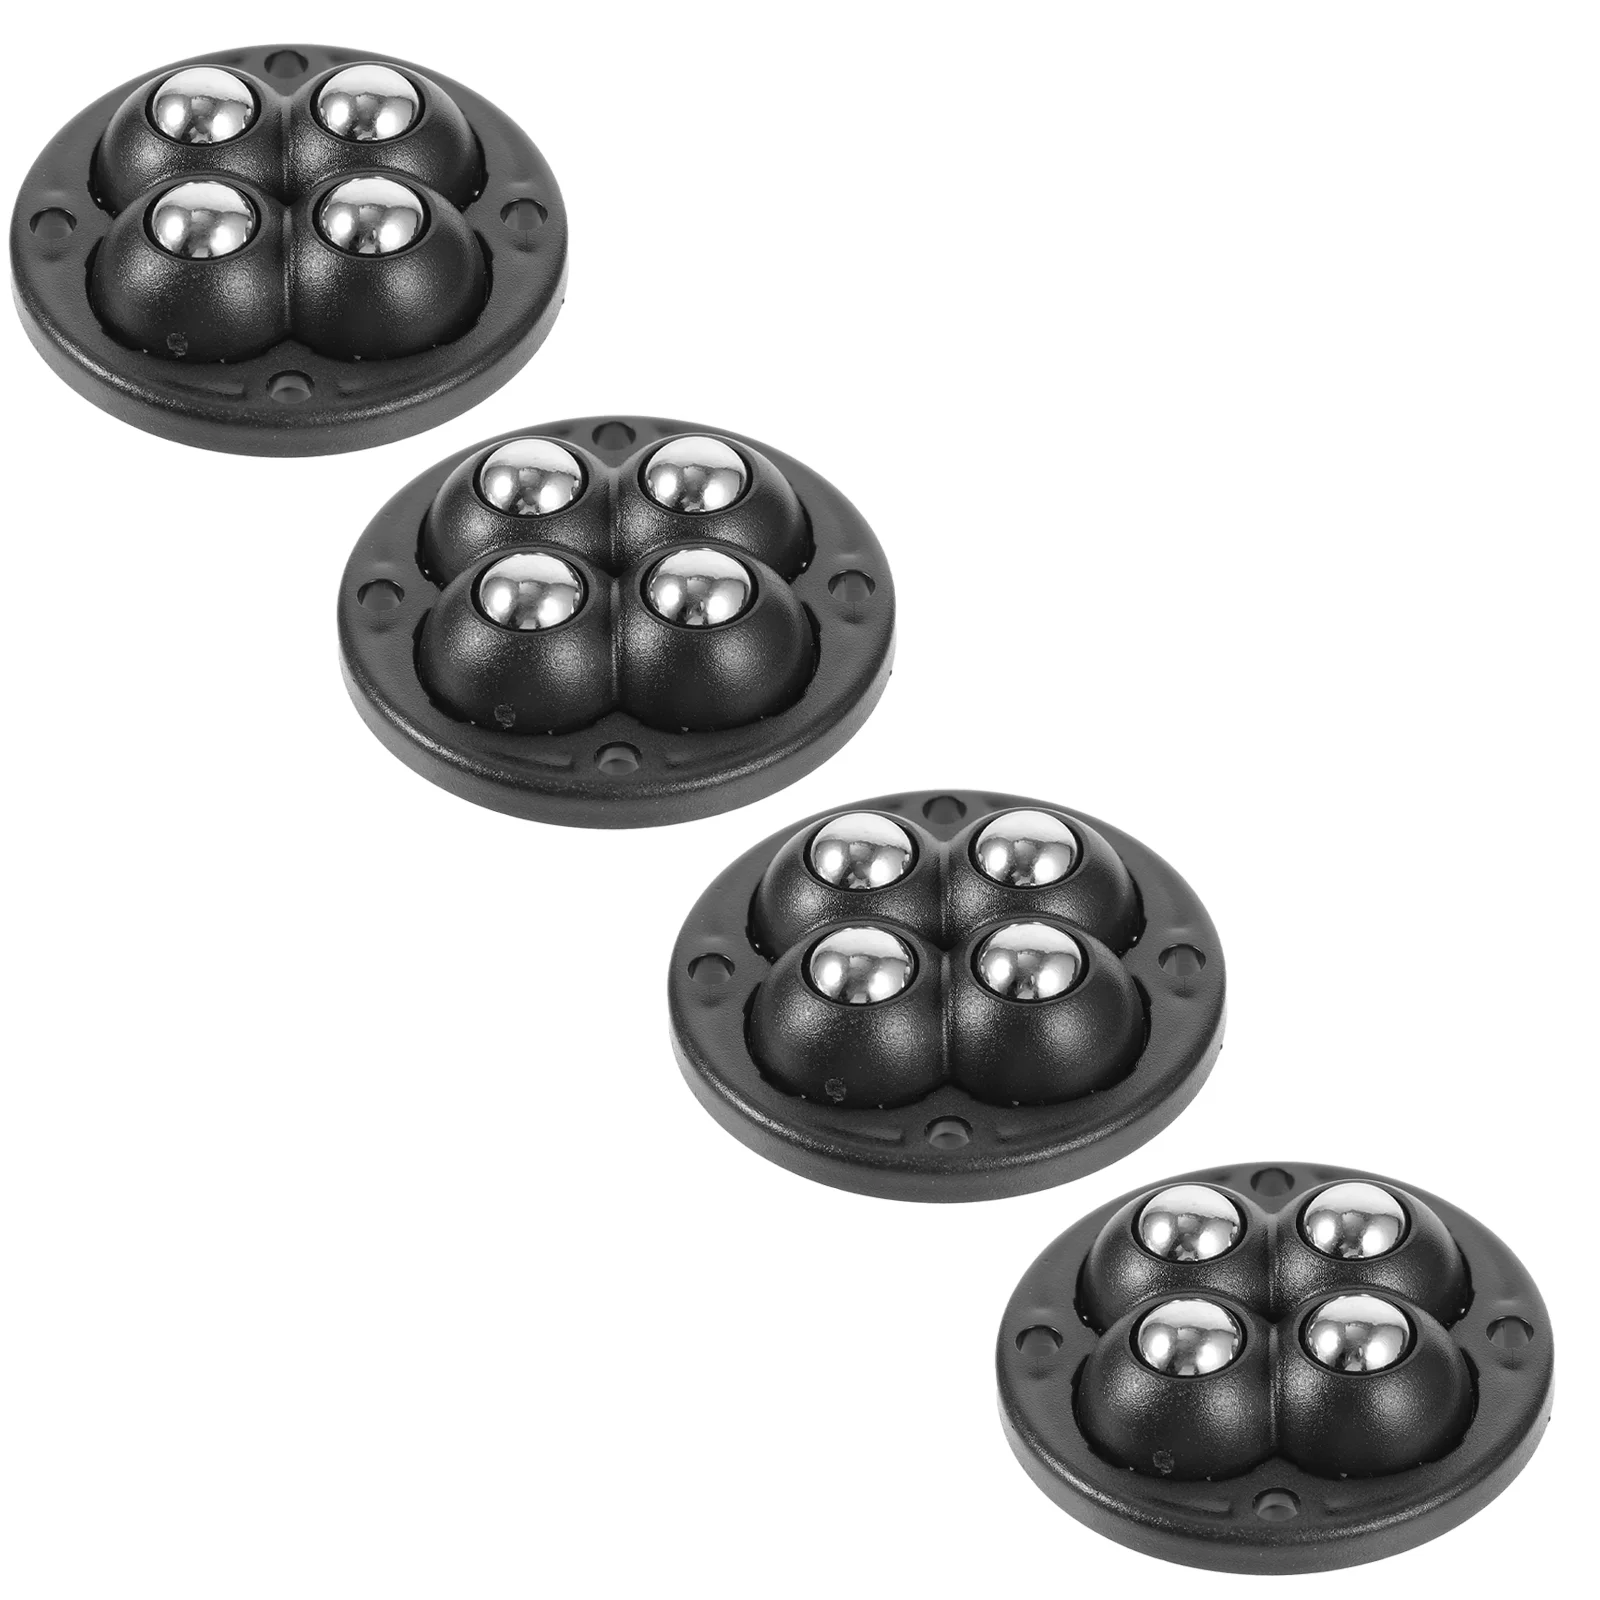 

4 Pcs Ball Pulley Adhesive Swivel Casters Sticky Wheels Trash Can Storage Bin Steel Mini Small Appliances Crates